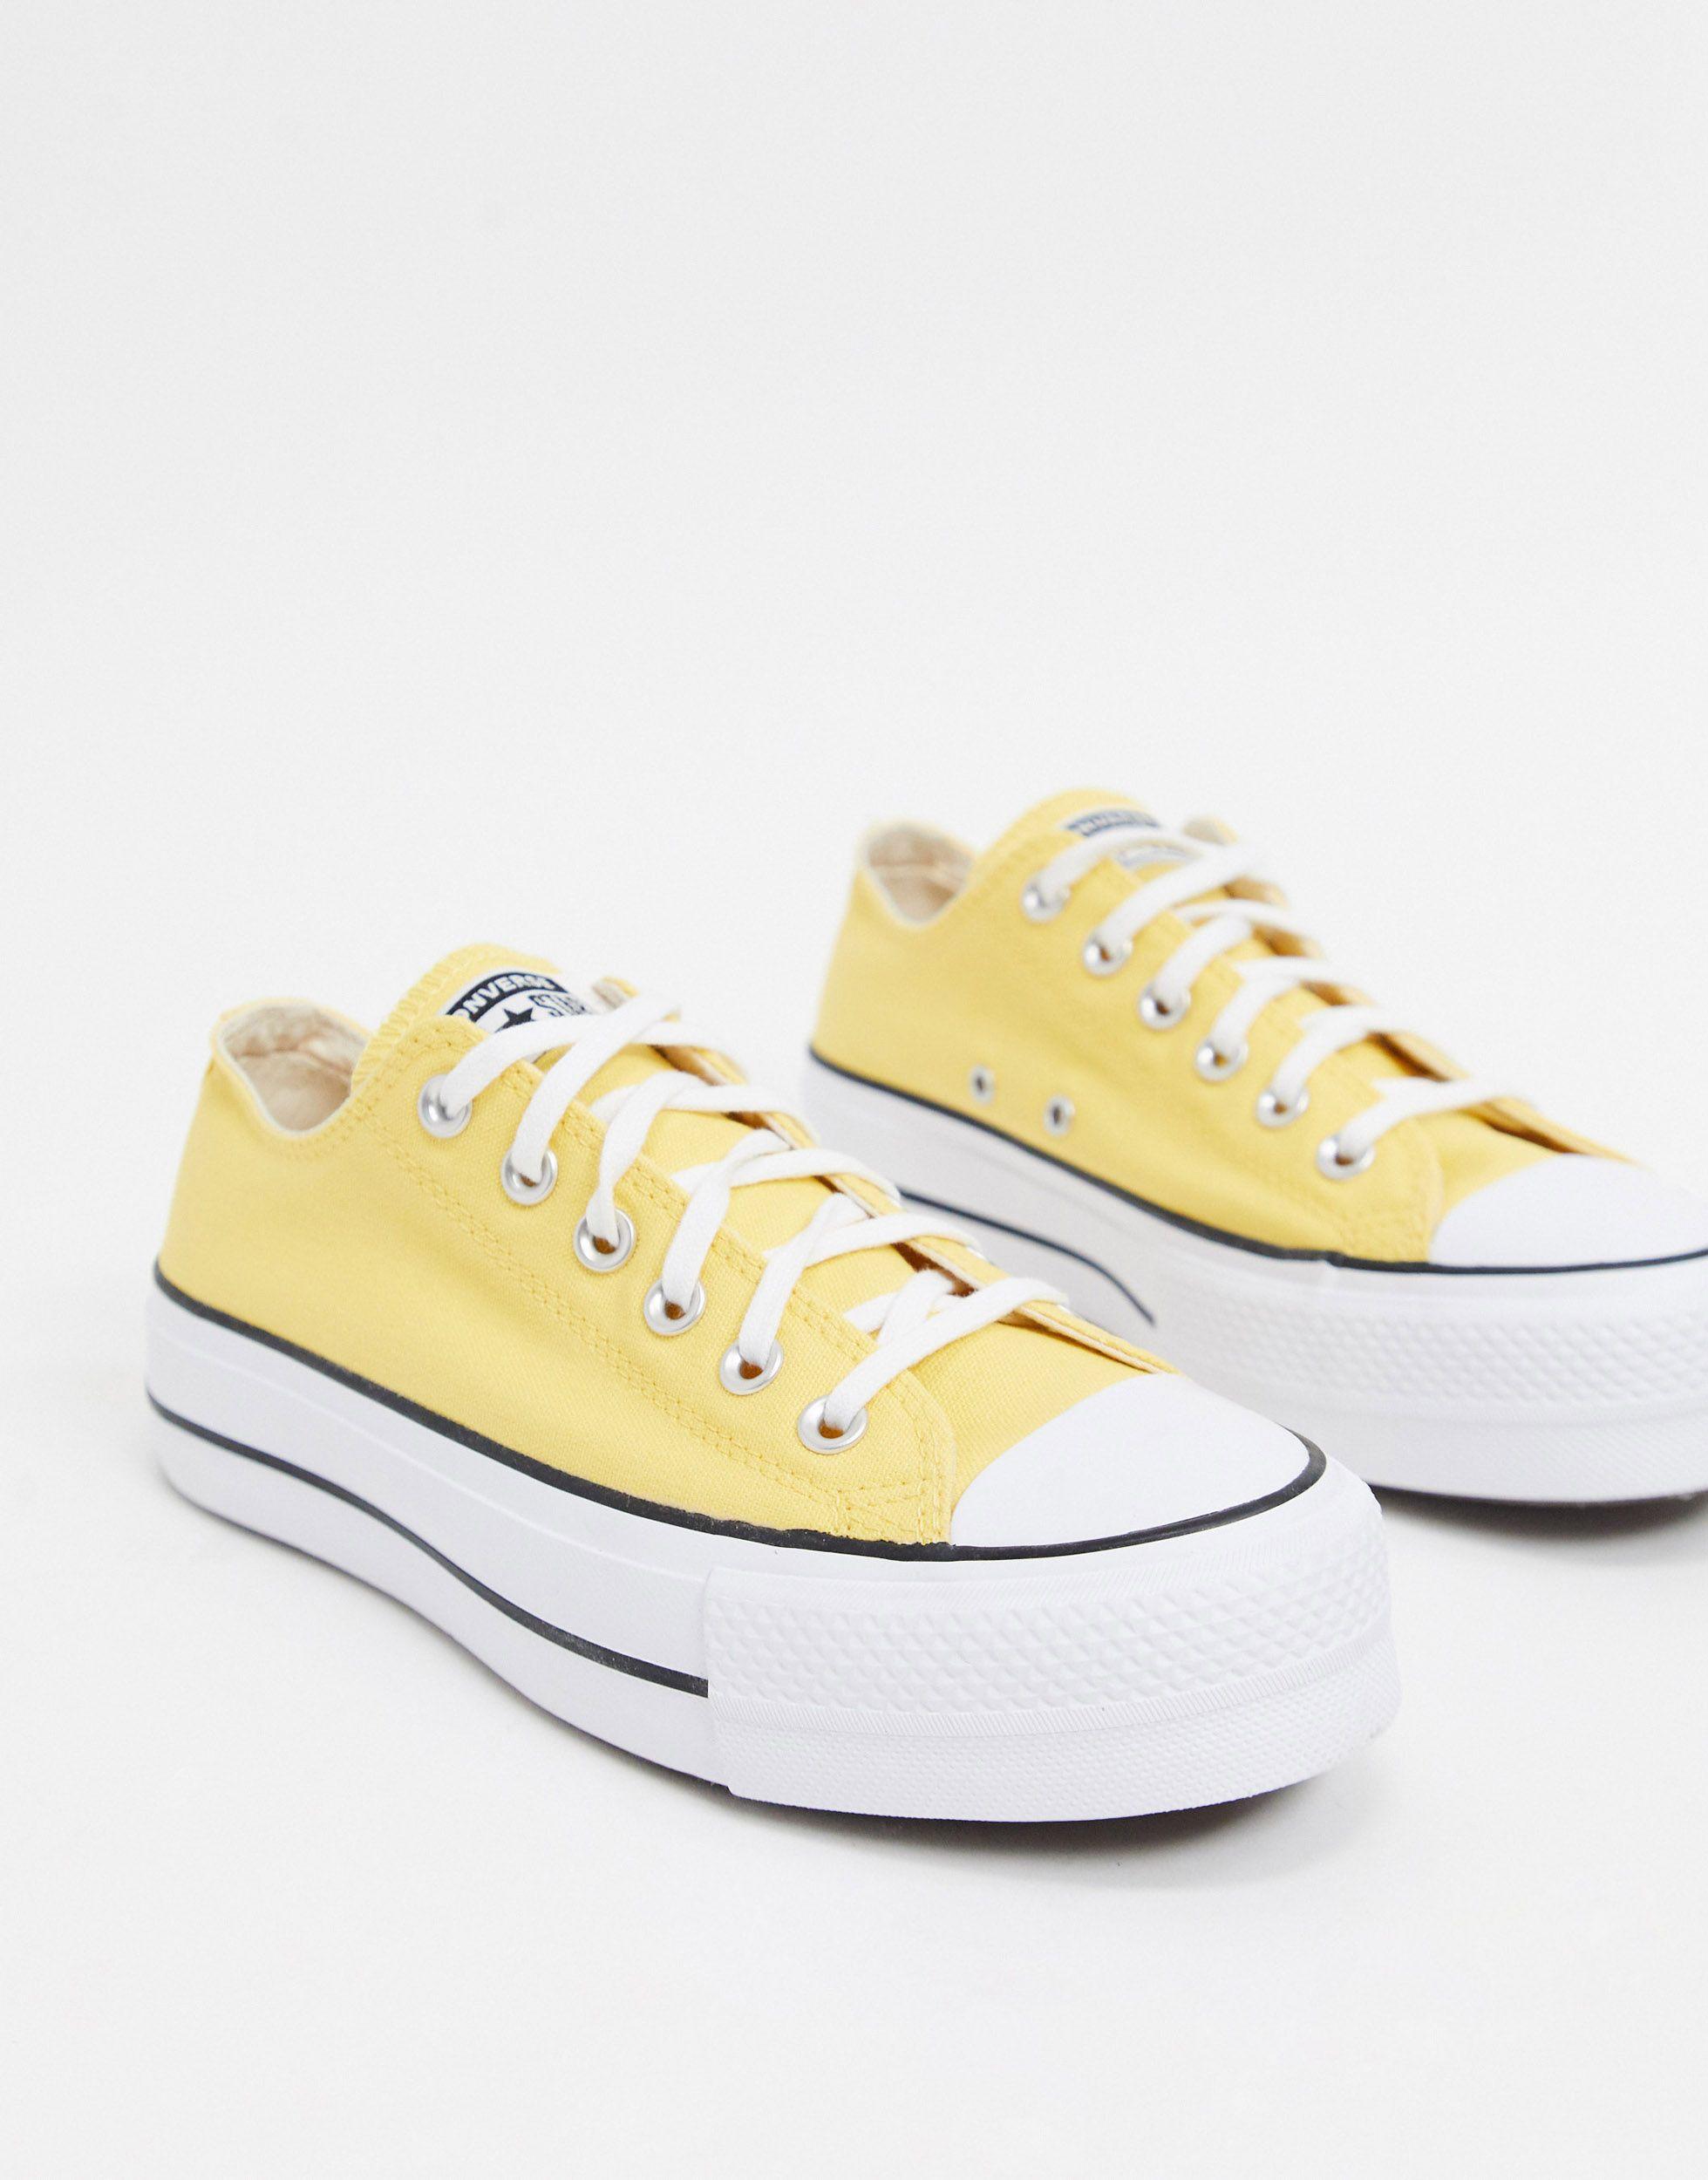 yellow all star clean lift platform trainers